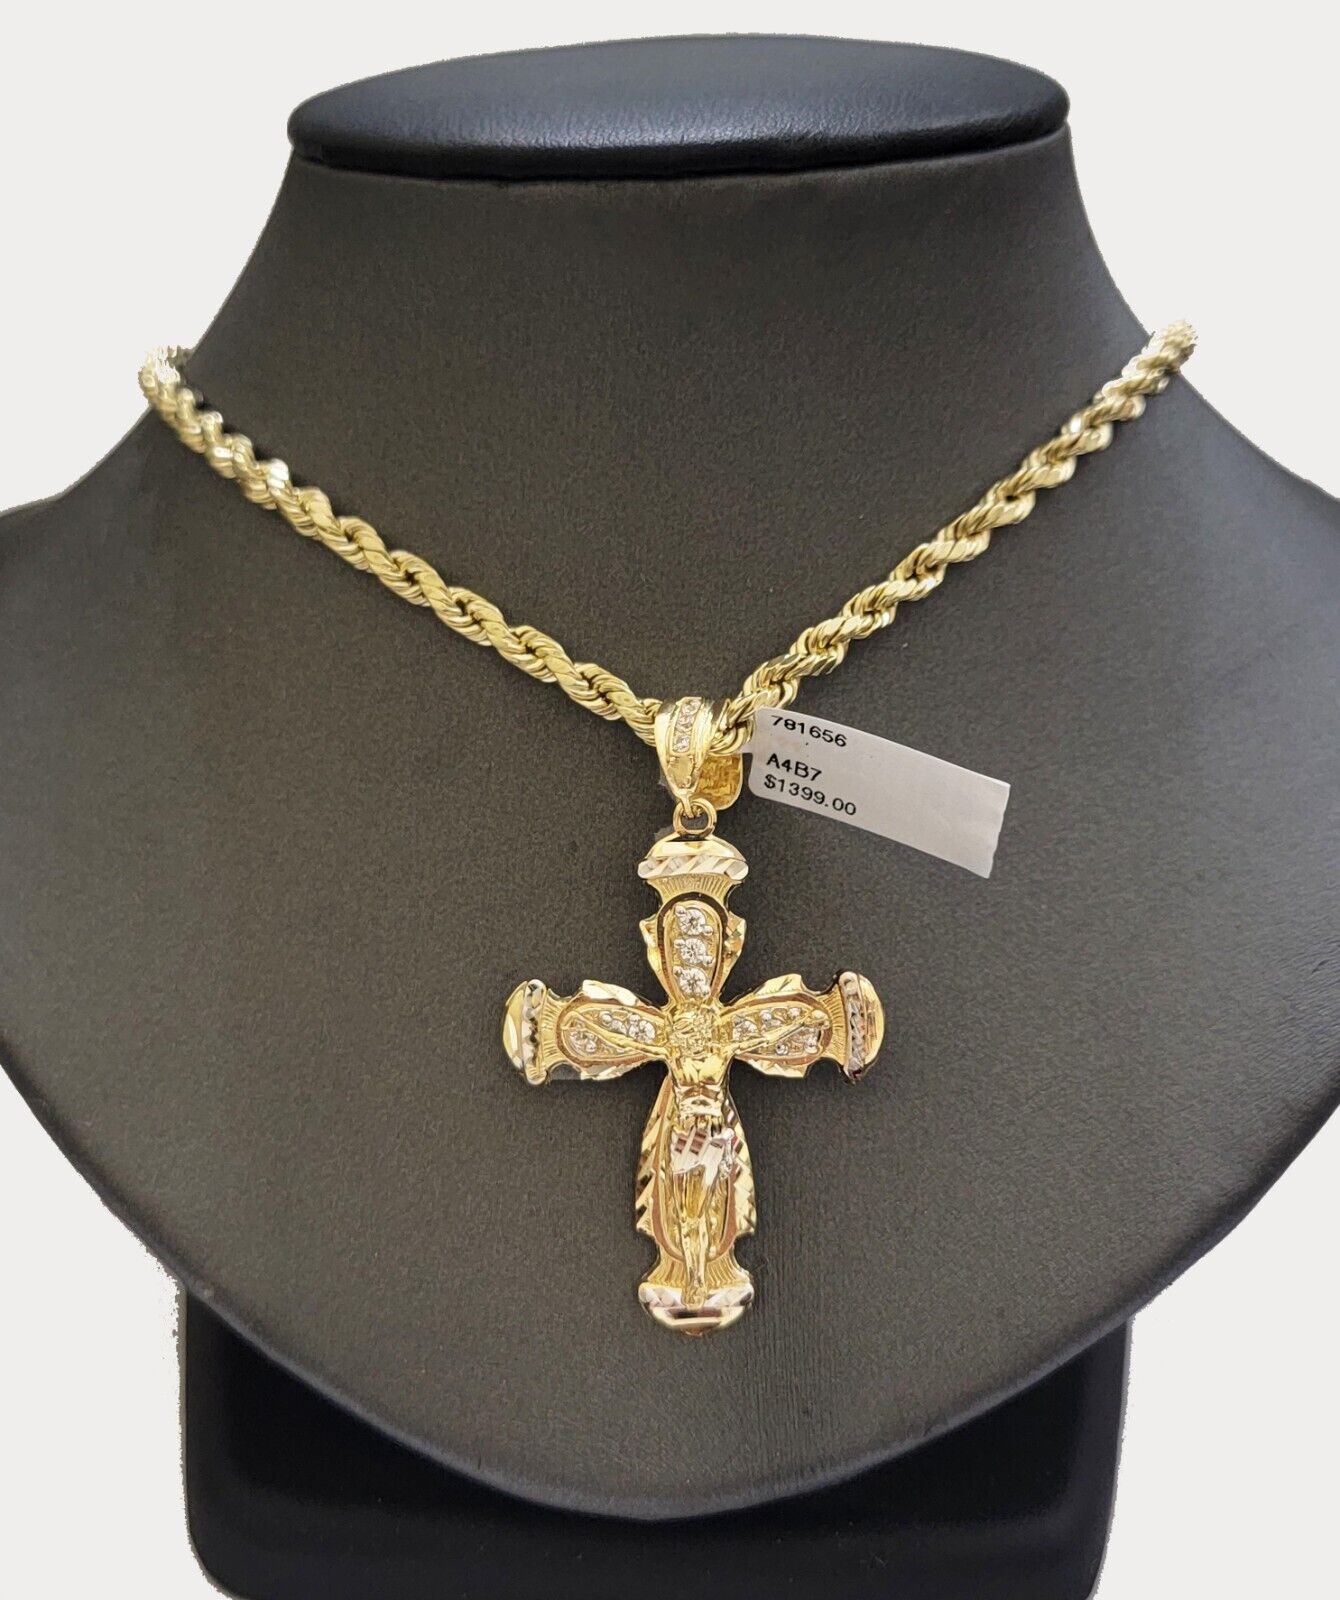 Real 10k Yellow Gold Cross Charm pendant Rope Chain Necklace 5mm 24" SET For Men